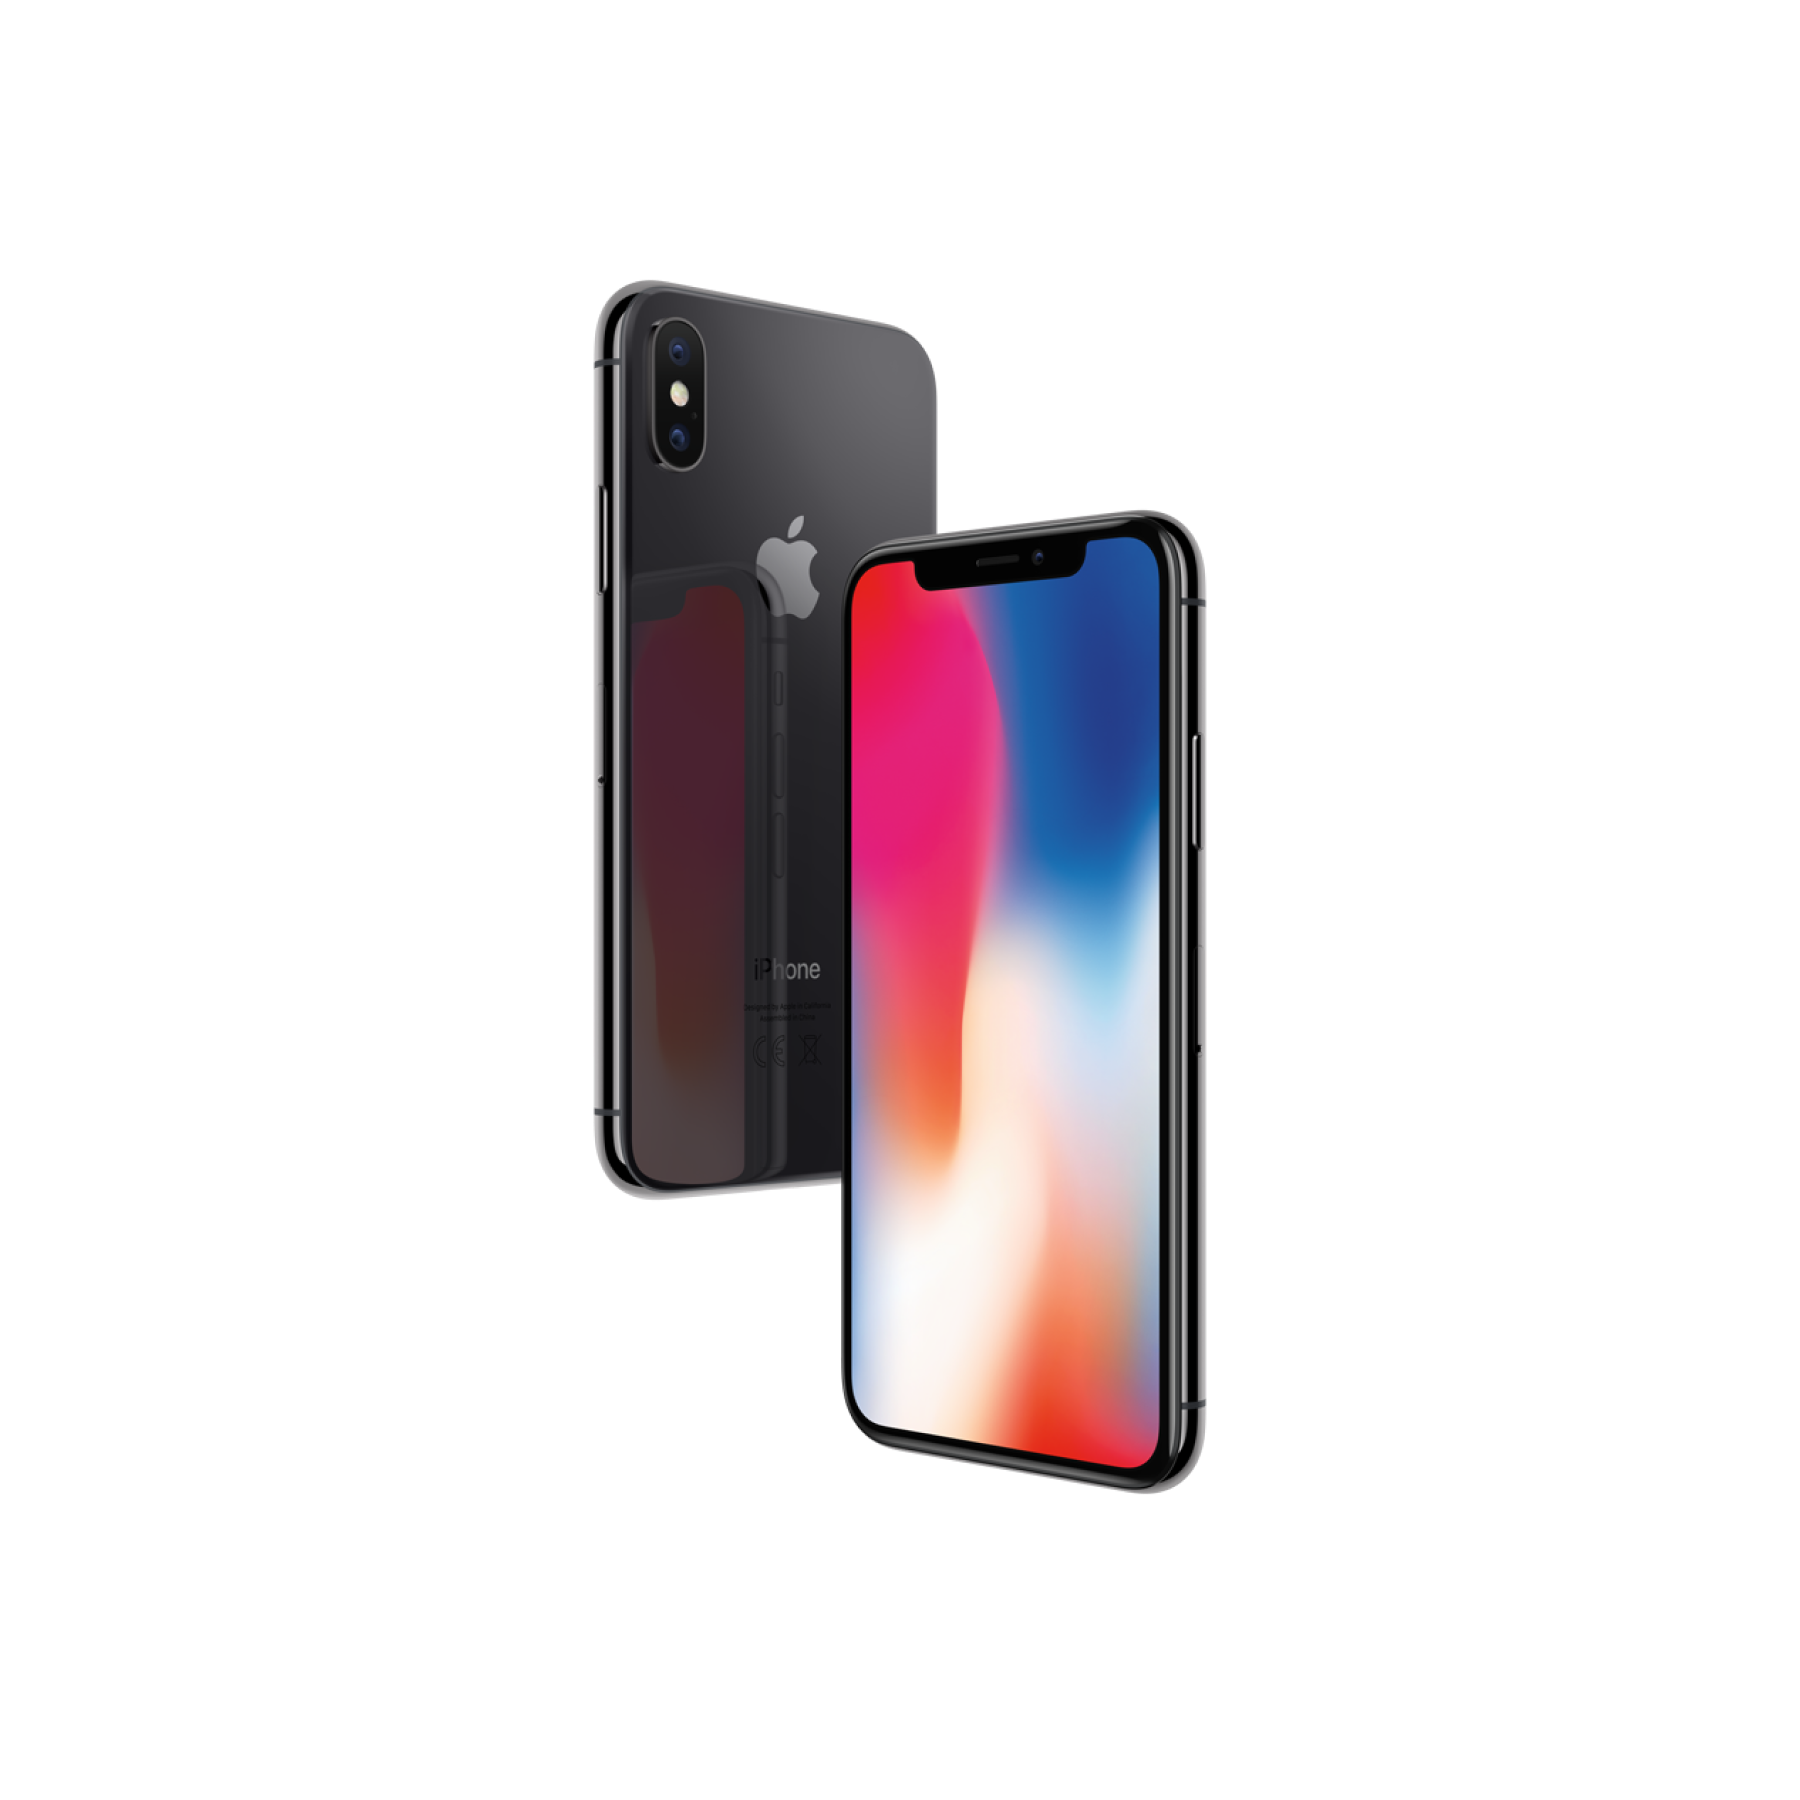 iPhone X 256GB - Space Grey (Better)